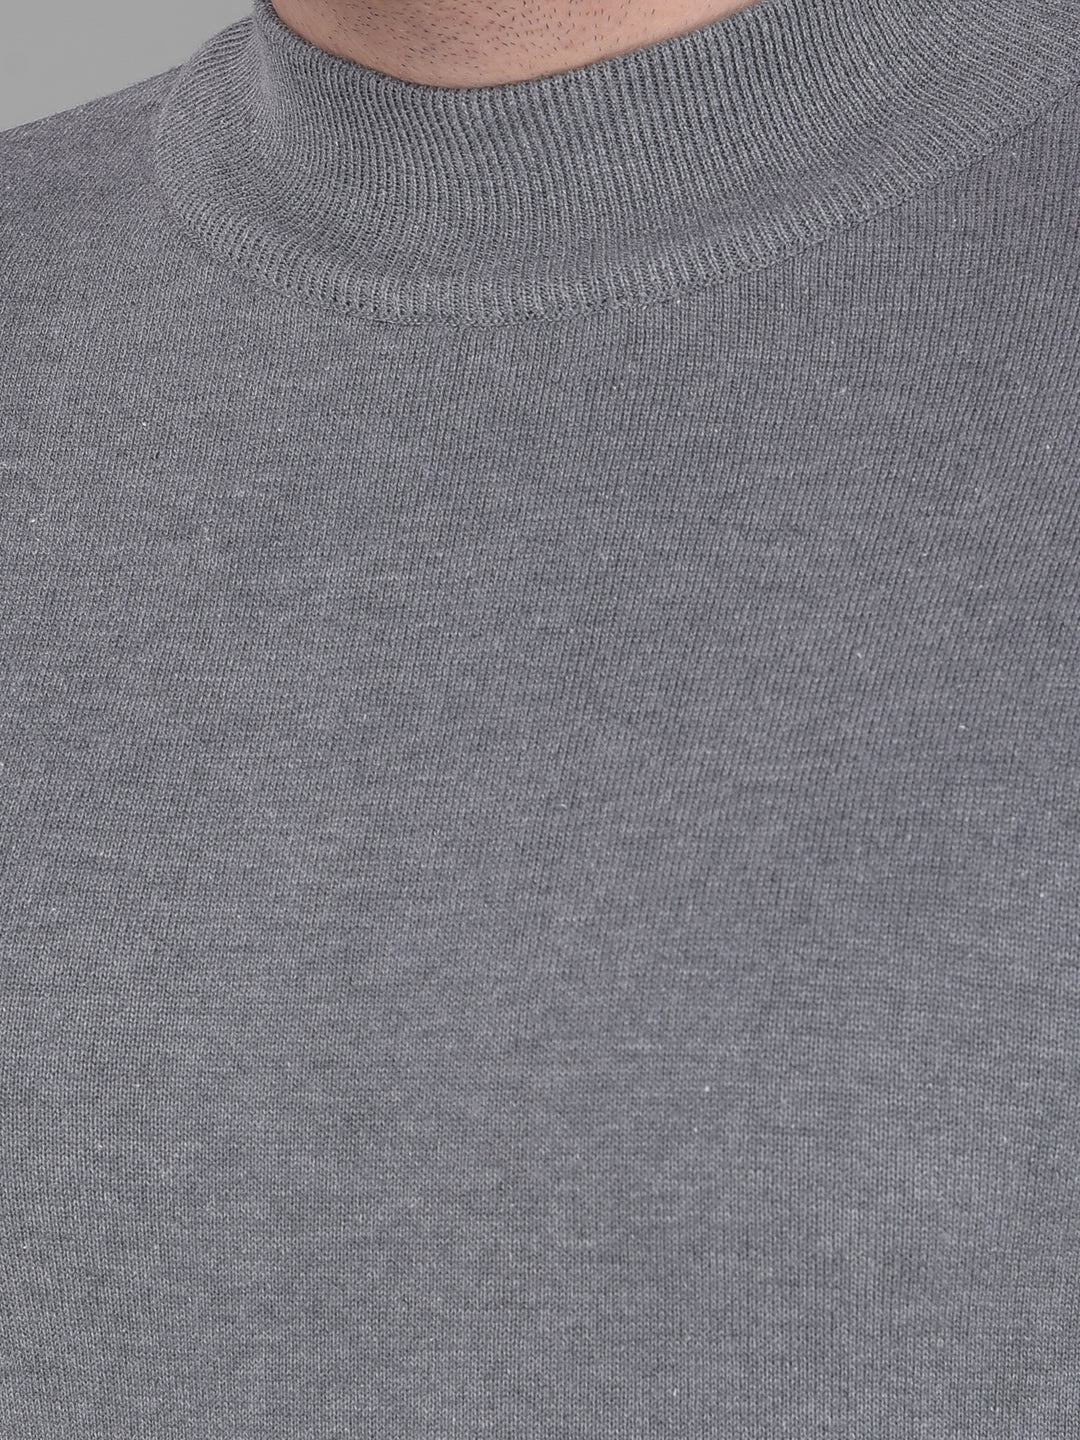 COBB SOLID GREY HIGH NECK SWEATER